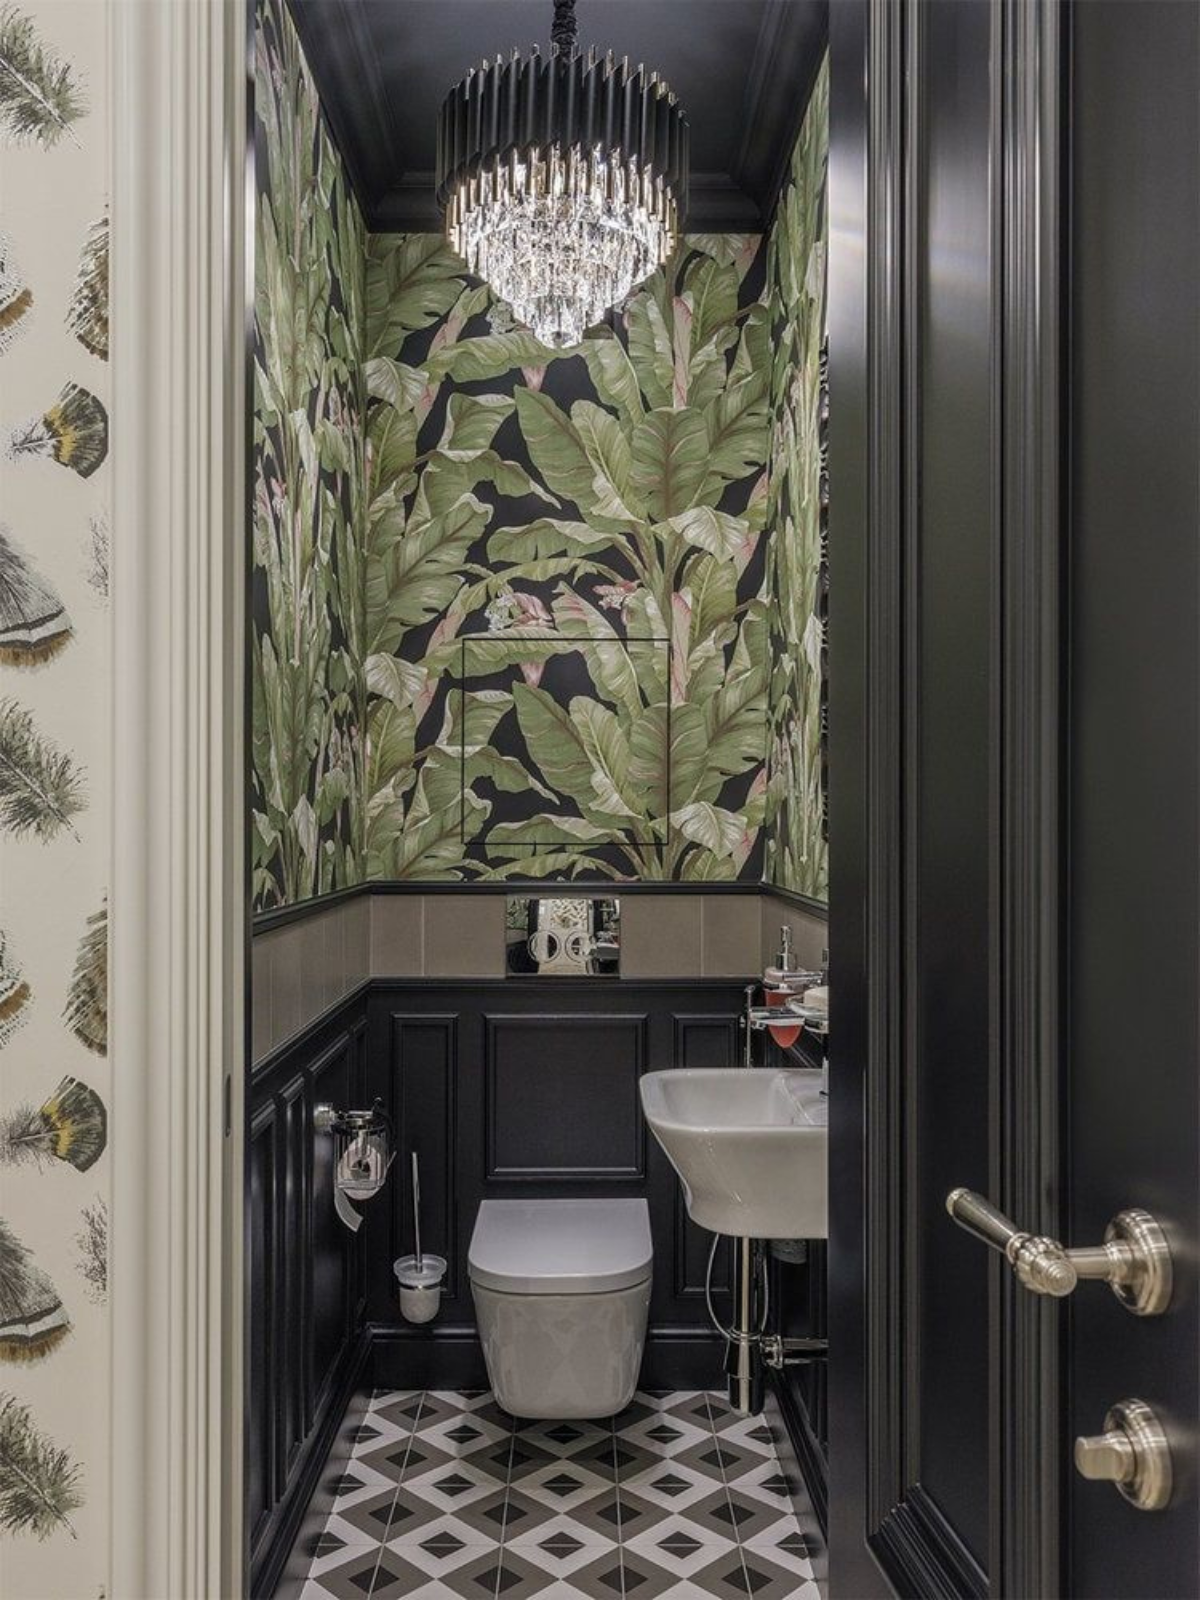 powder room with tropical inspired wallpaper, crystal chandelier, patterned tile flooring, toilet and vanity sink